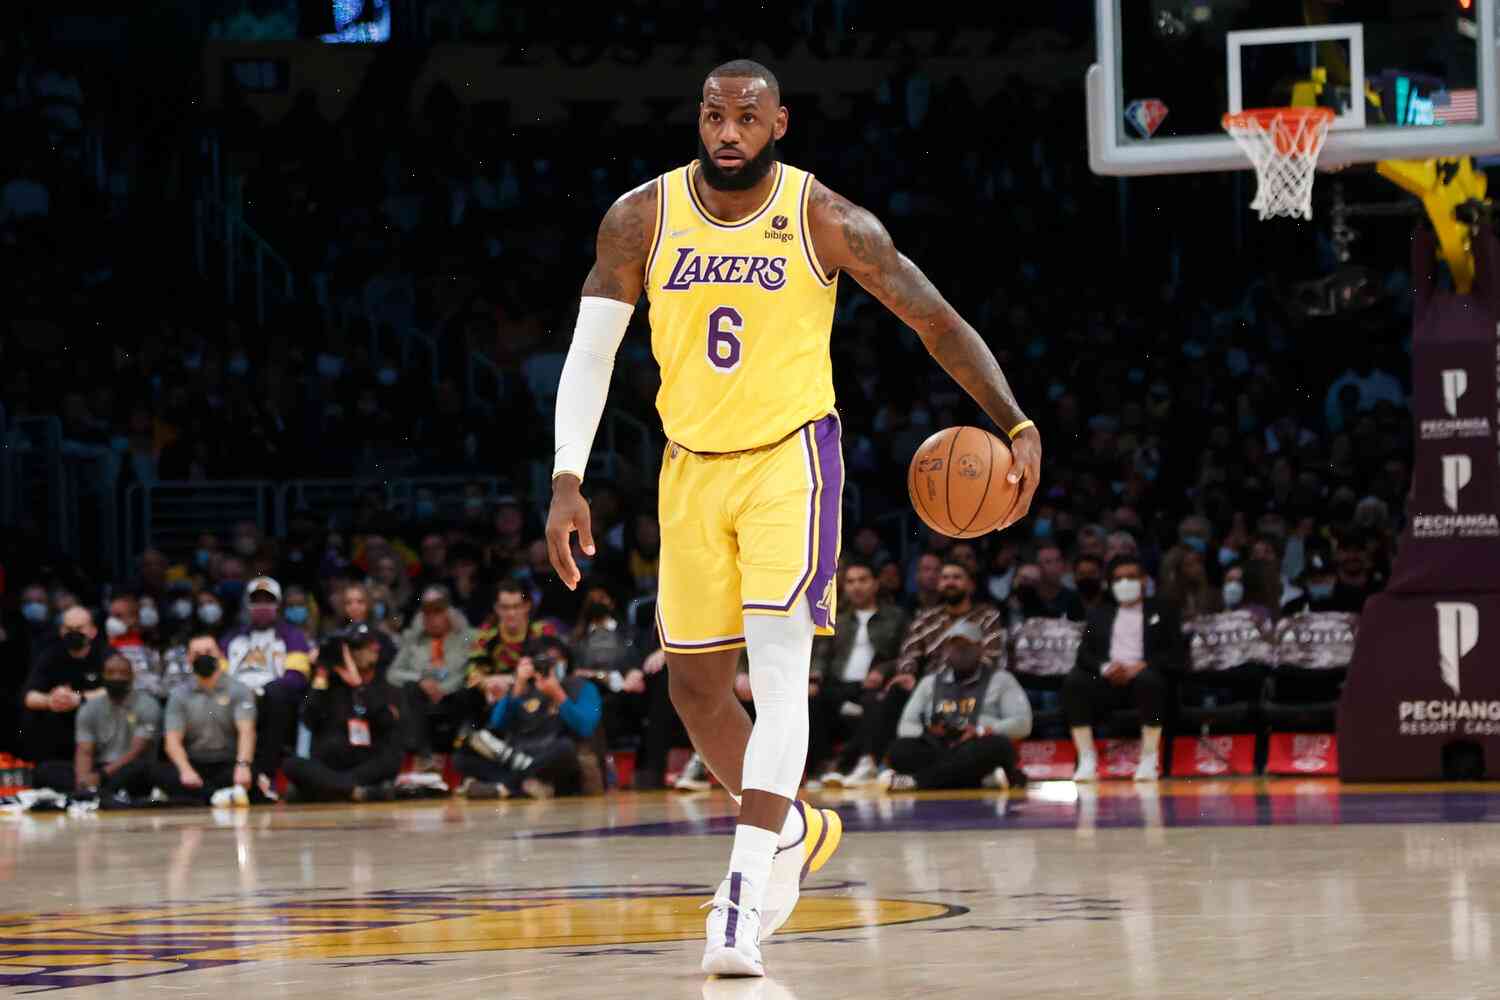 LeBron James to play despite saying he has 'virus' from previous visit to Lakers